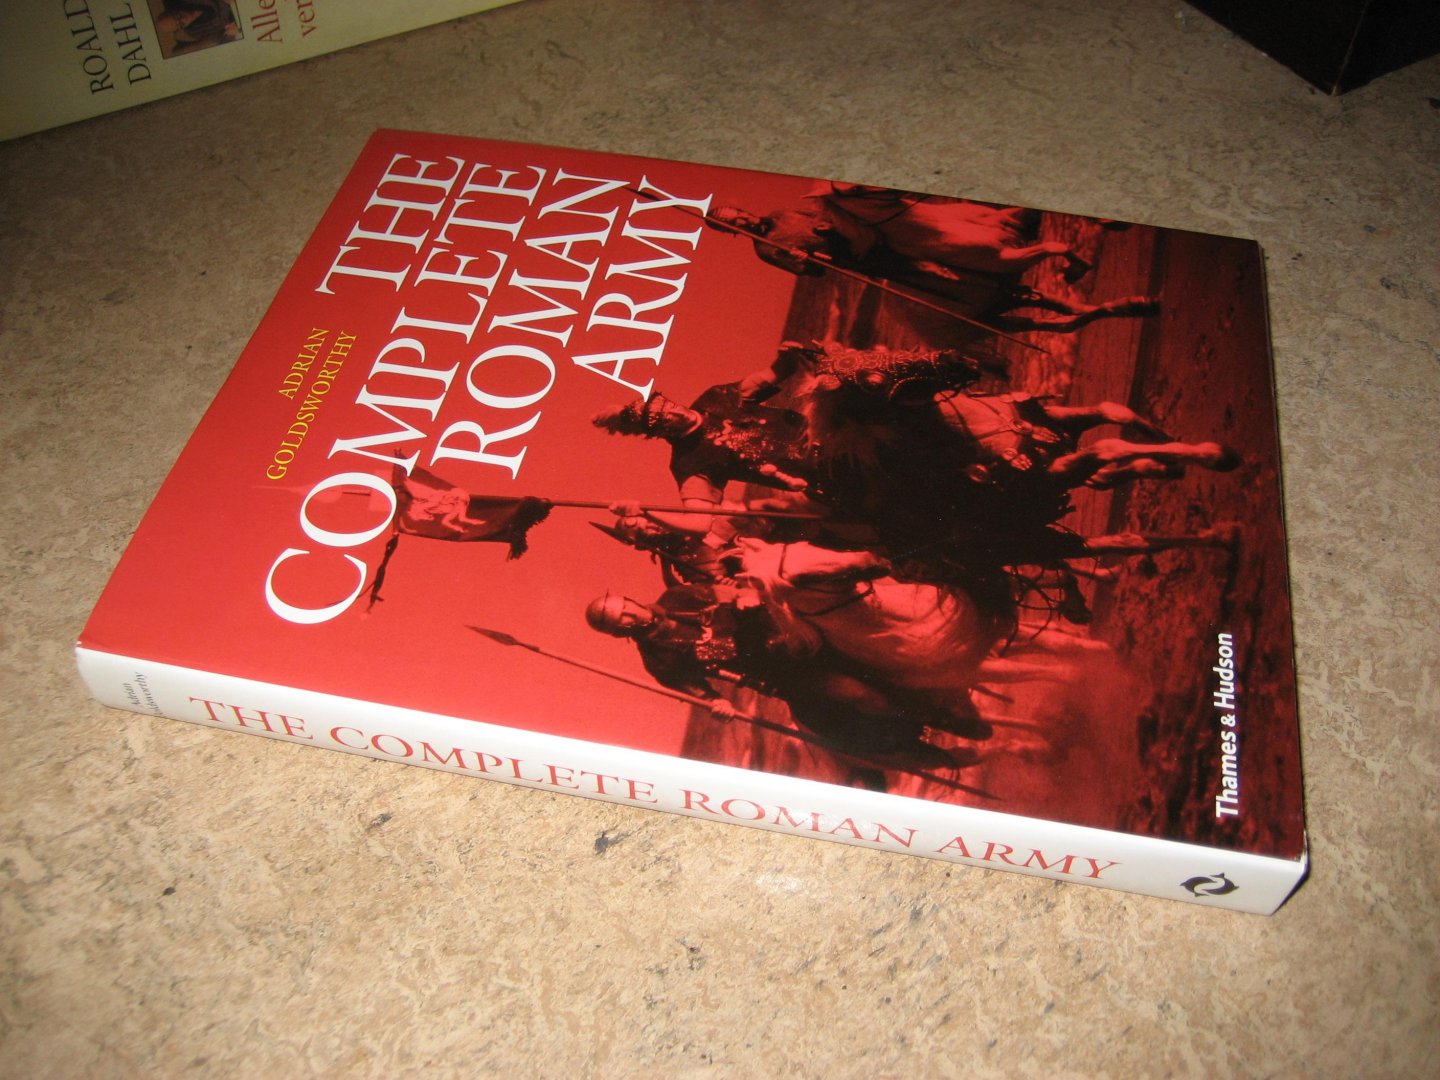 Goldsworthy, Adrian - The Complete Roman Army